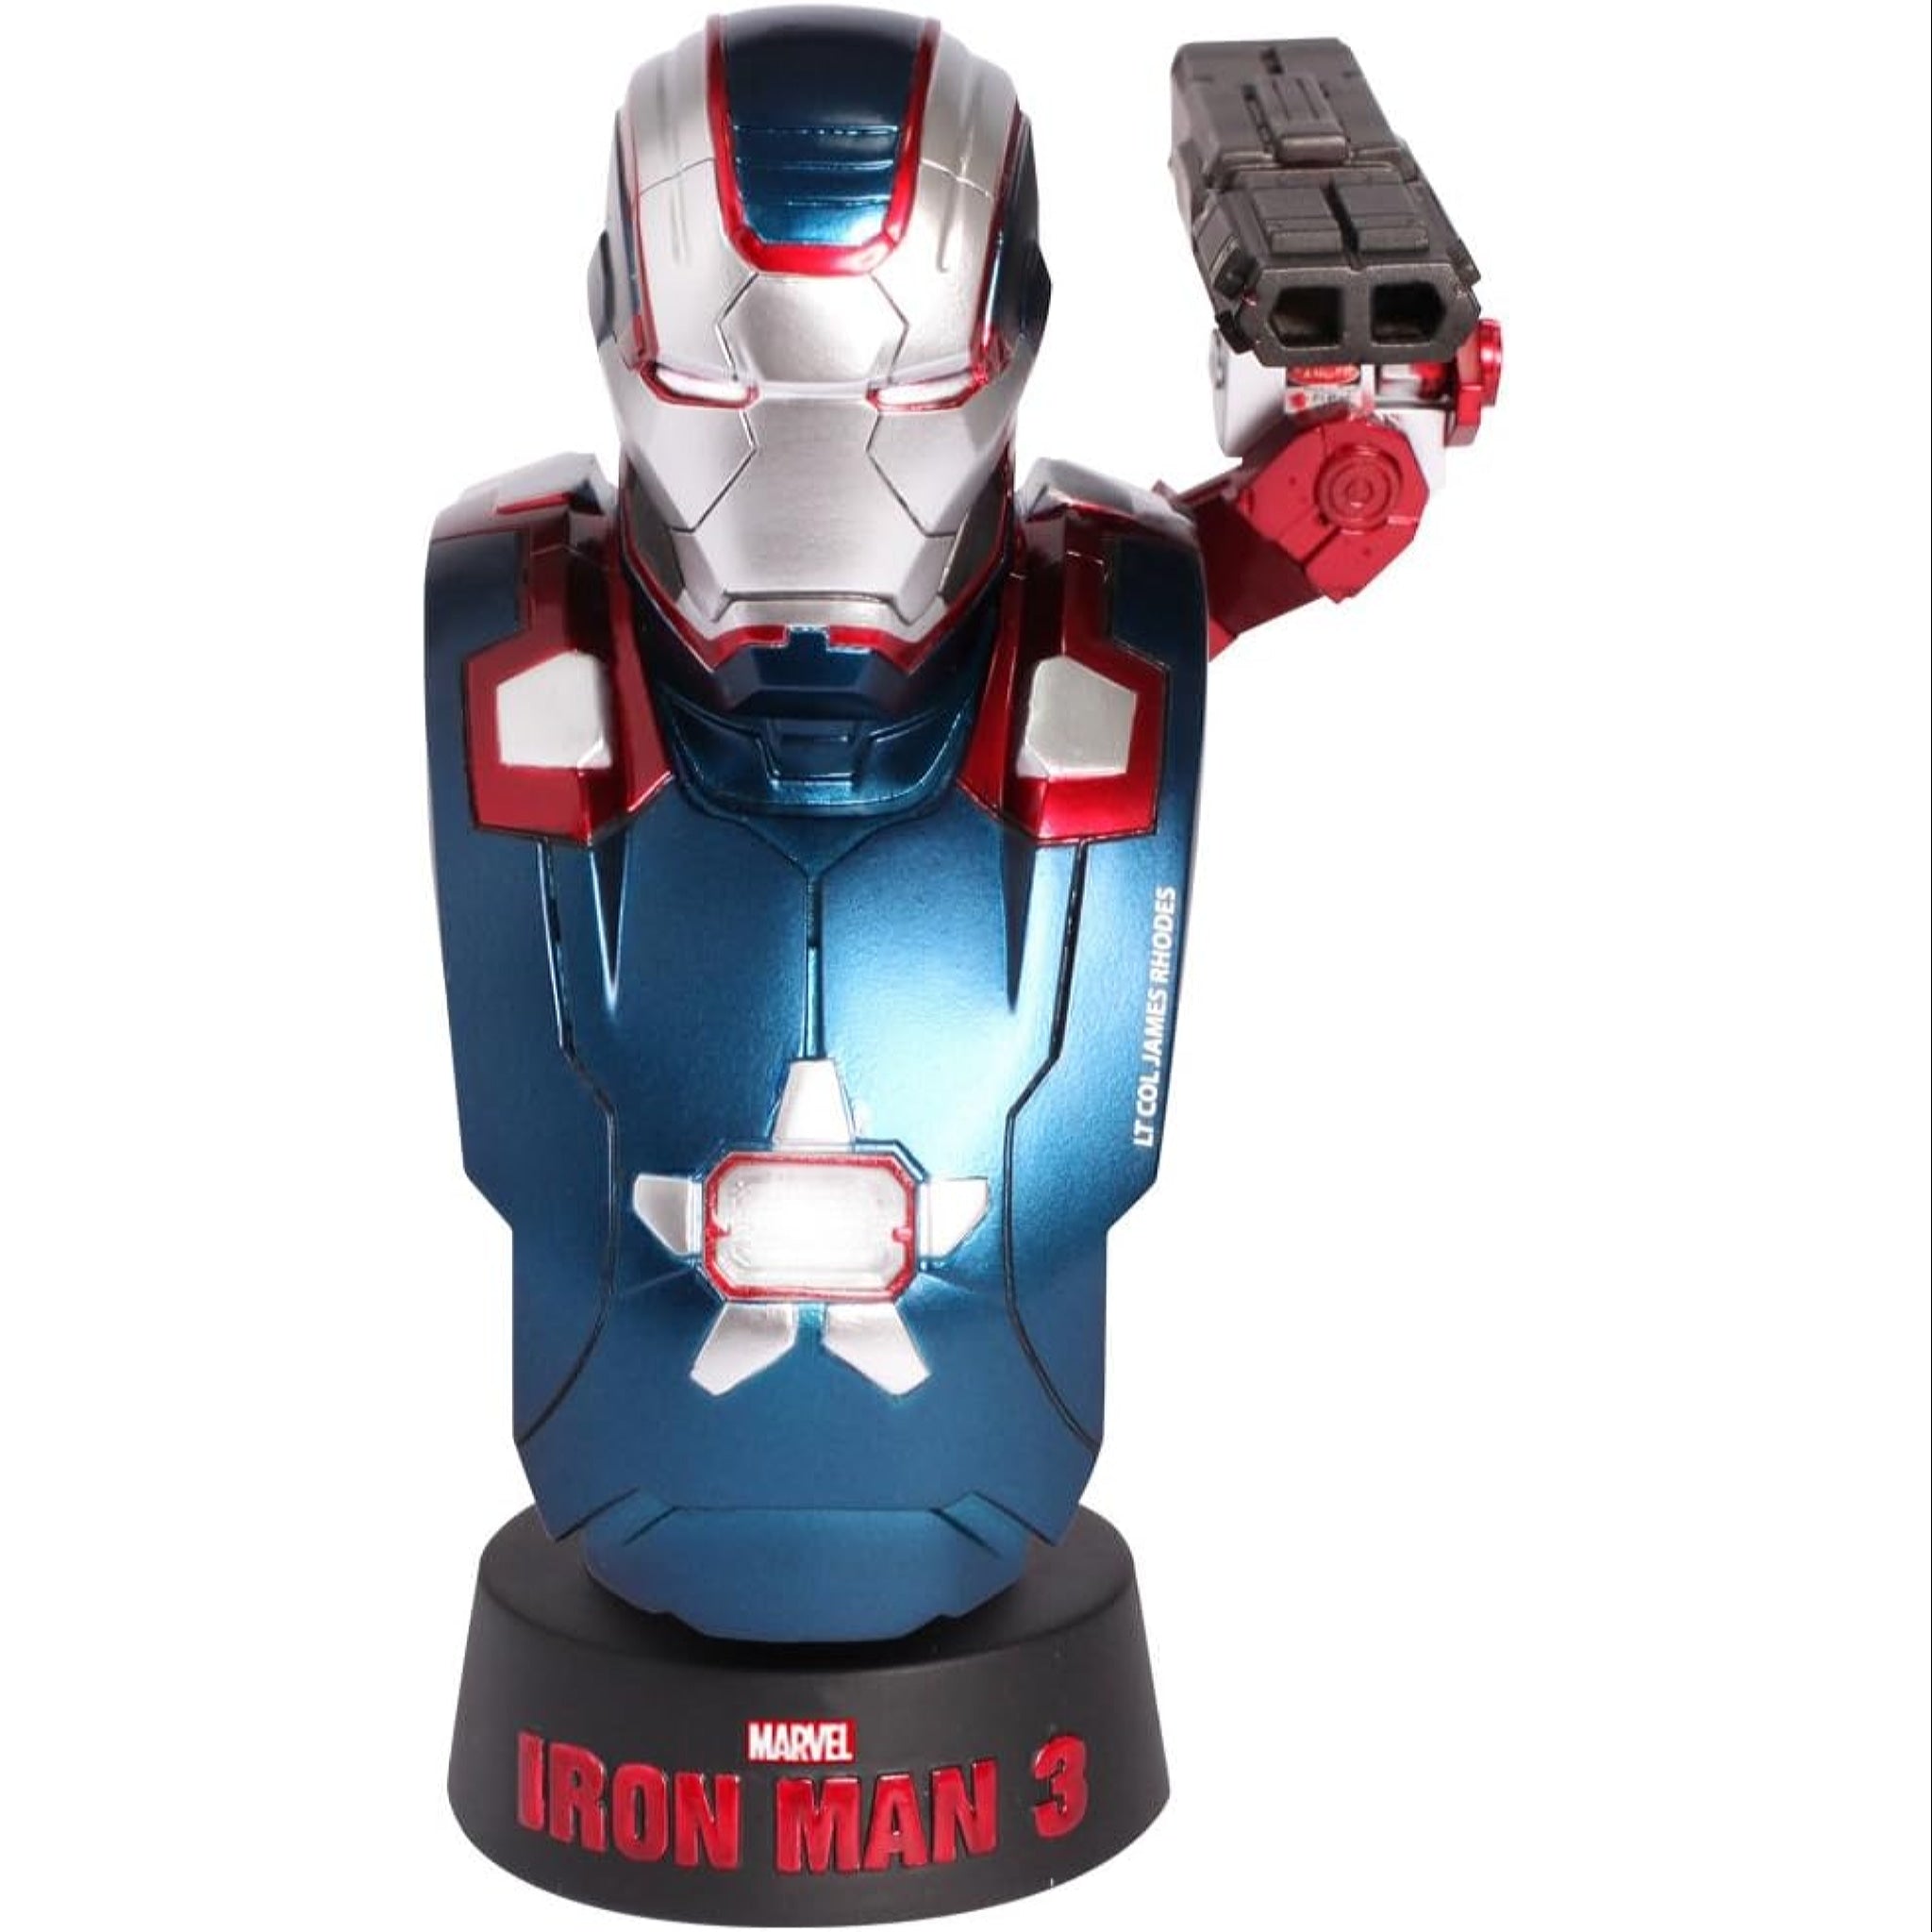 Iron Man 3 Iron Patriot Hot Toys 1:6 Scale Collectible Bust